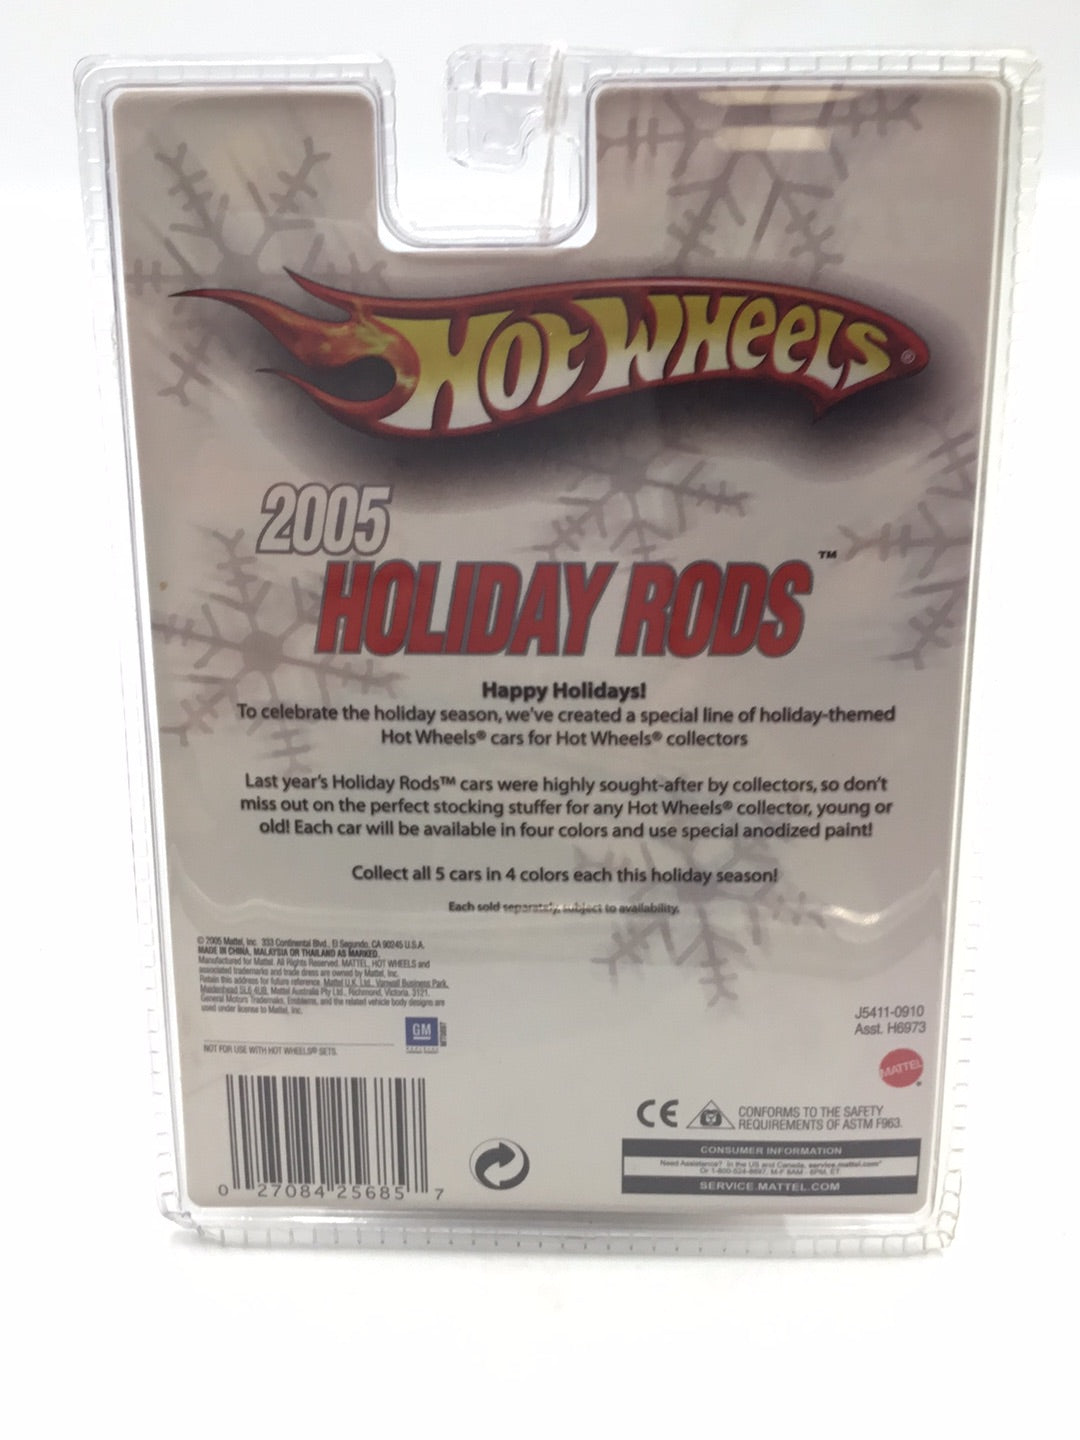 Hot wheels 2005 holiday rods #5 70 Chevelle SS Red real riders NN4